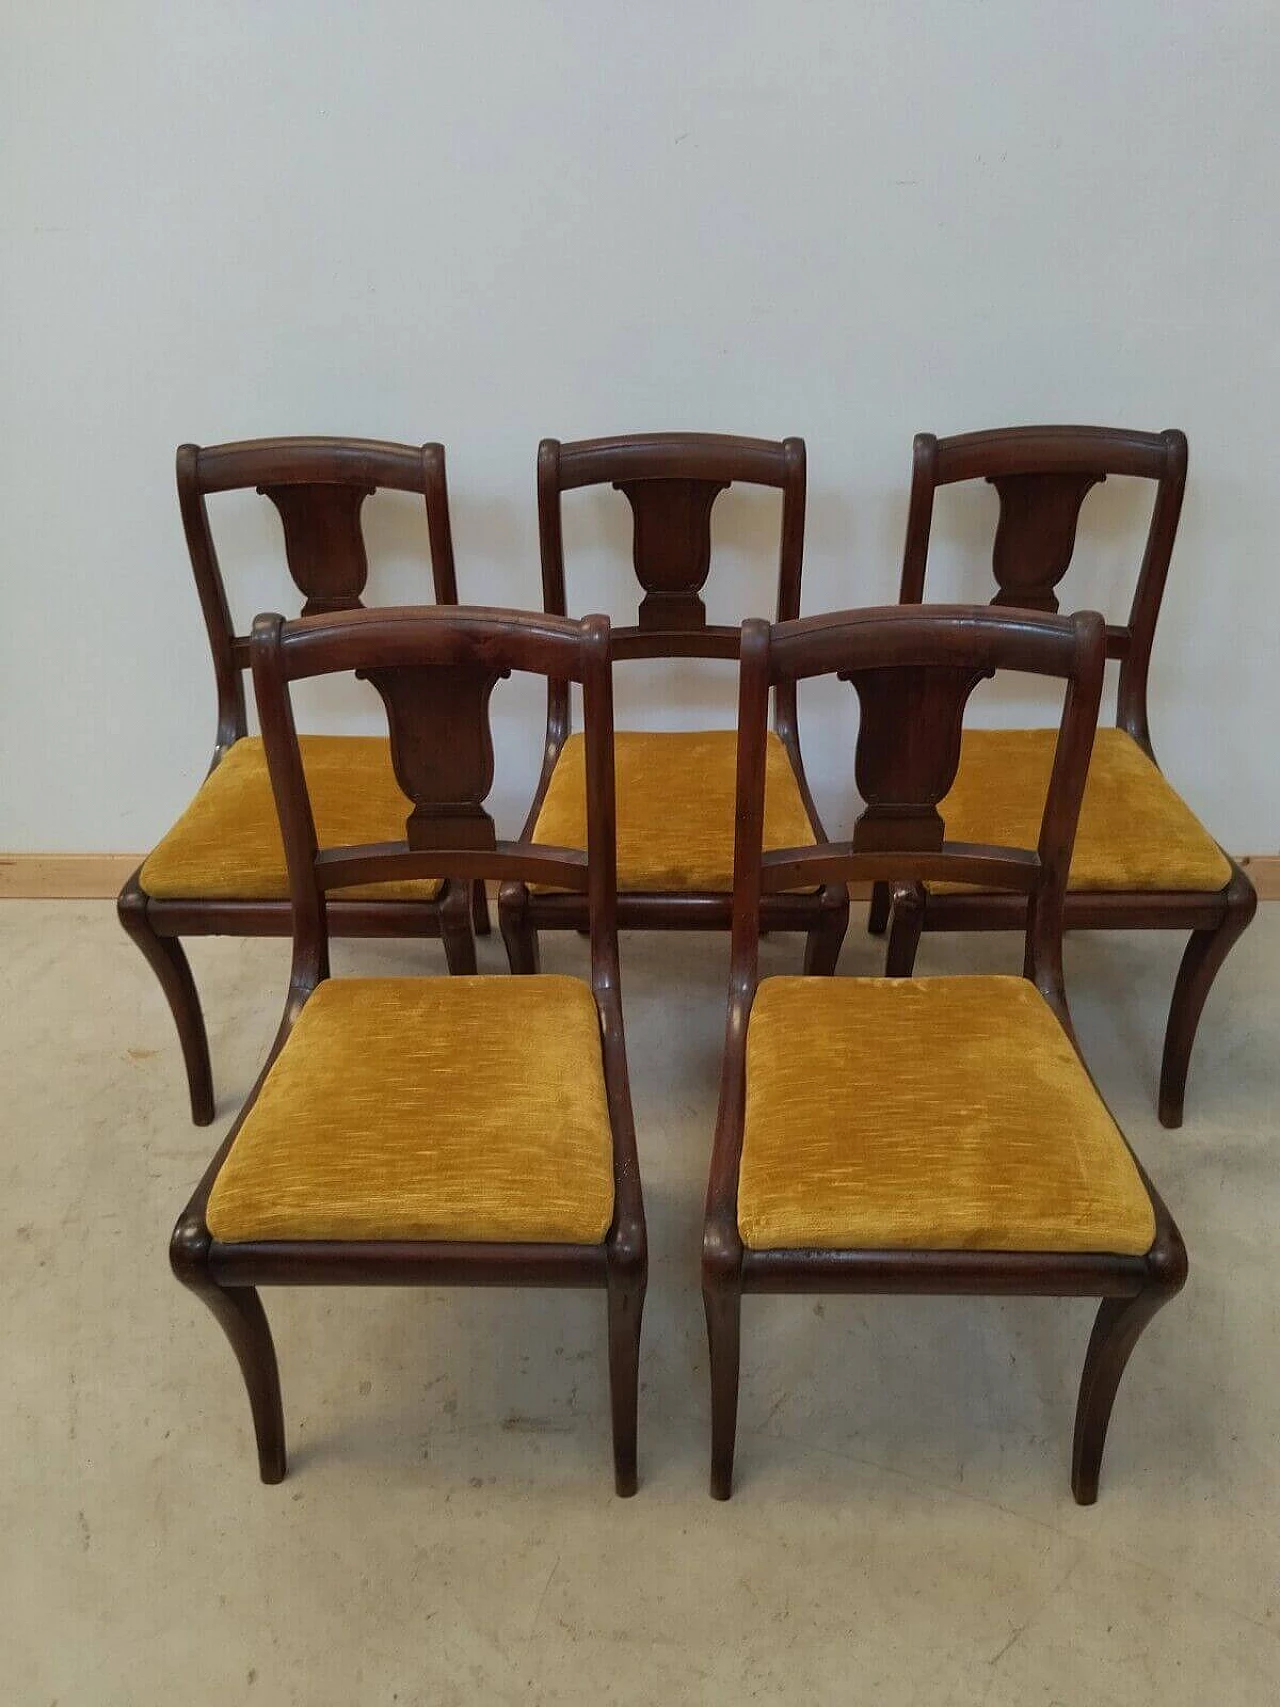 5 Empire-style walnut chairs, early 20th century 7